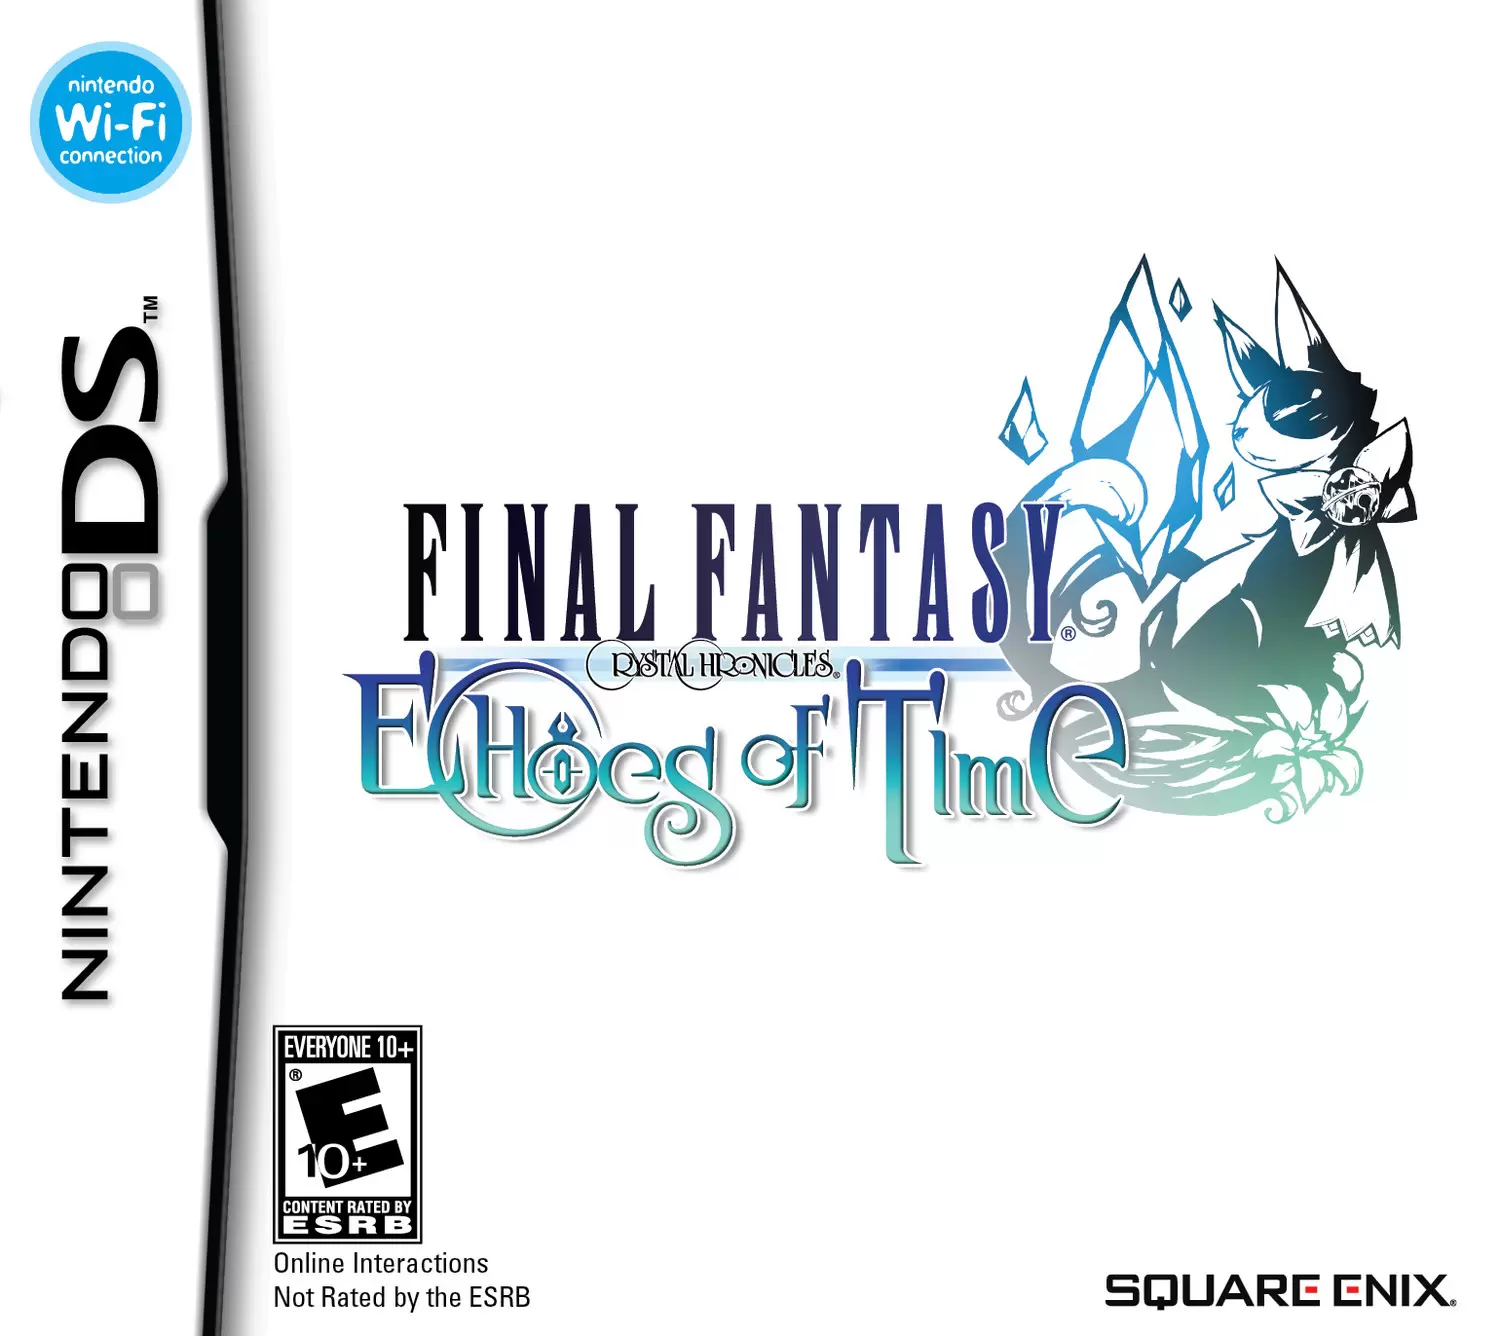 Nintendo DS Games - Final Fantasy Crystal Chronicles: Echoes of Time